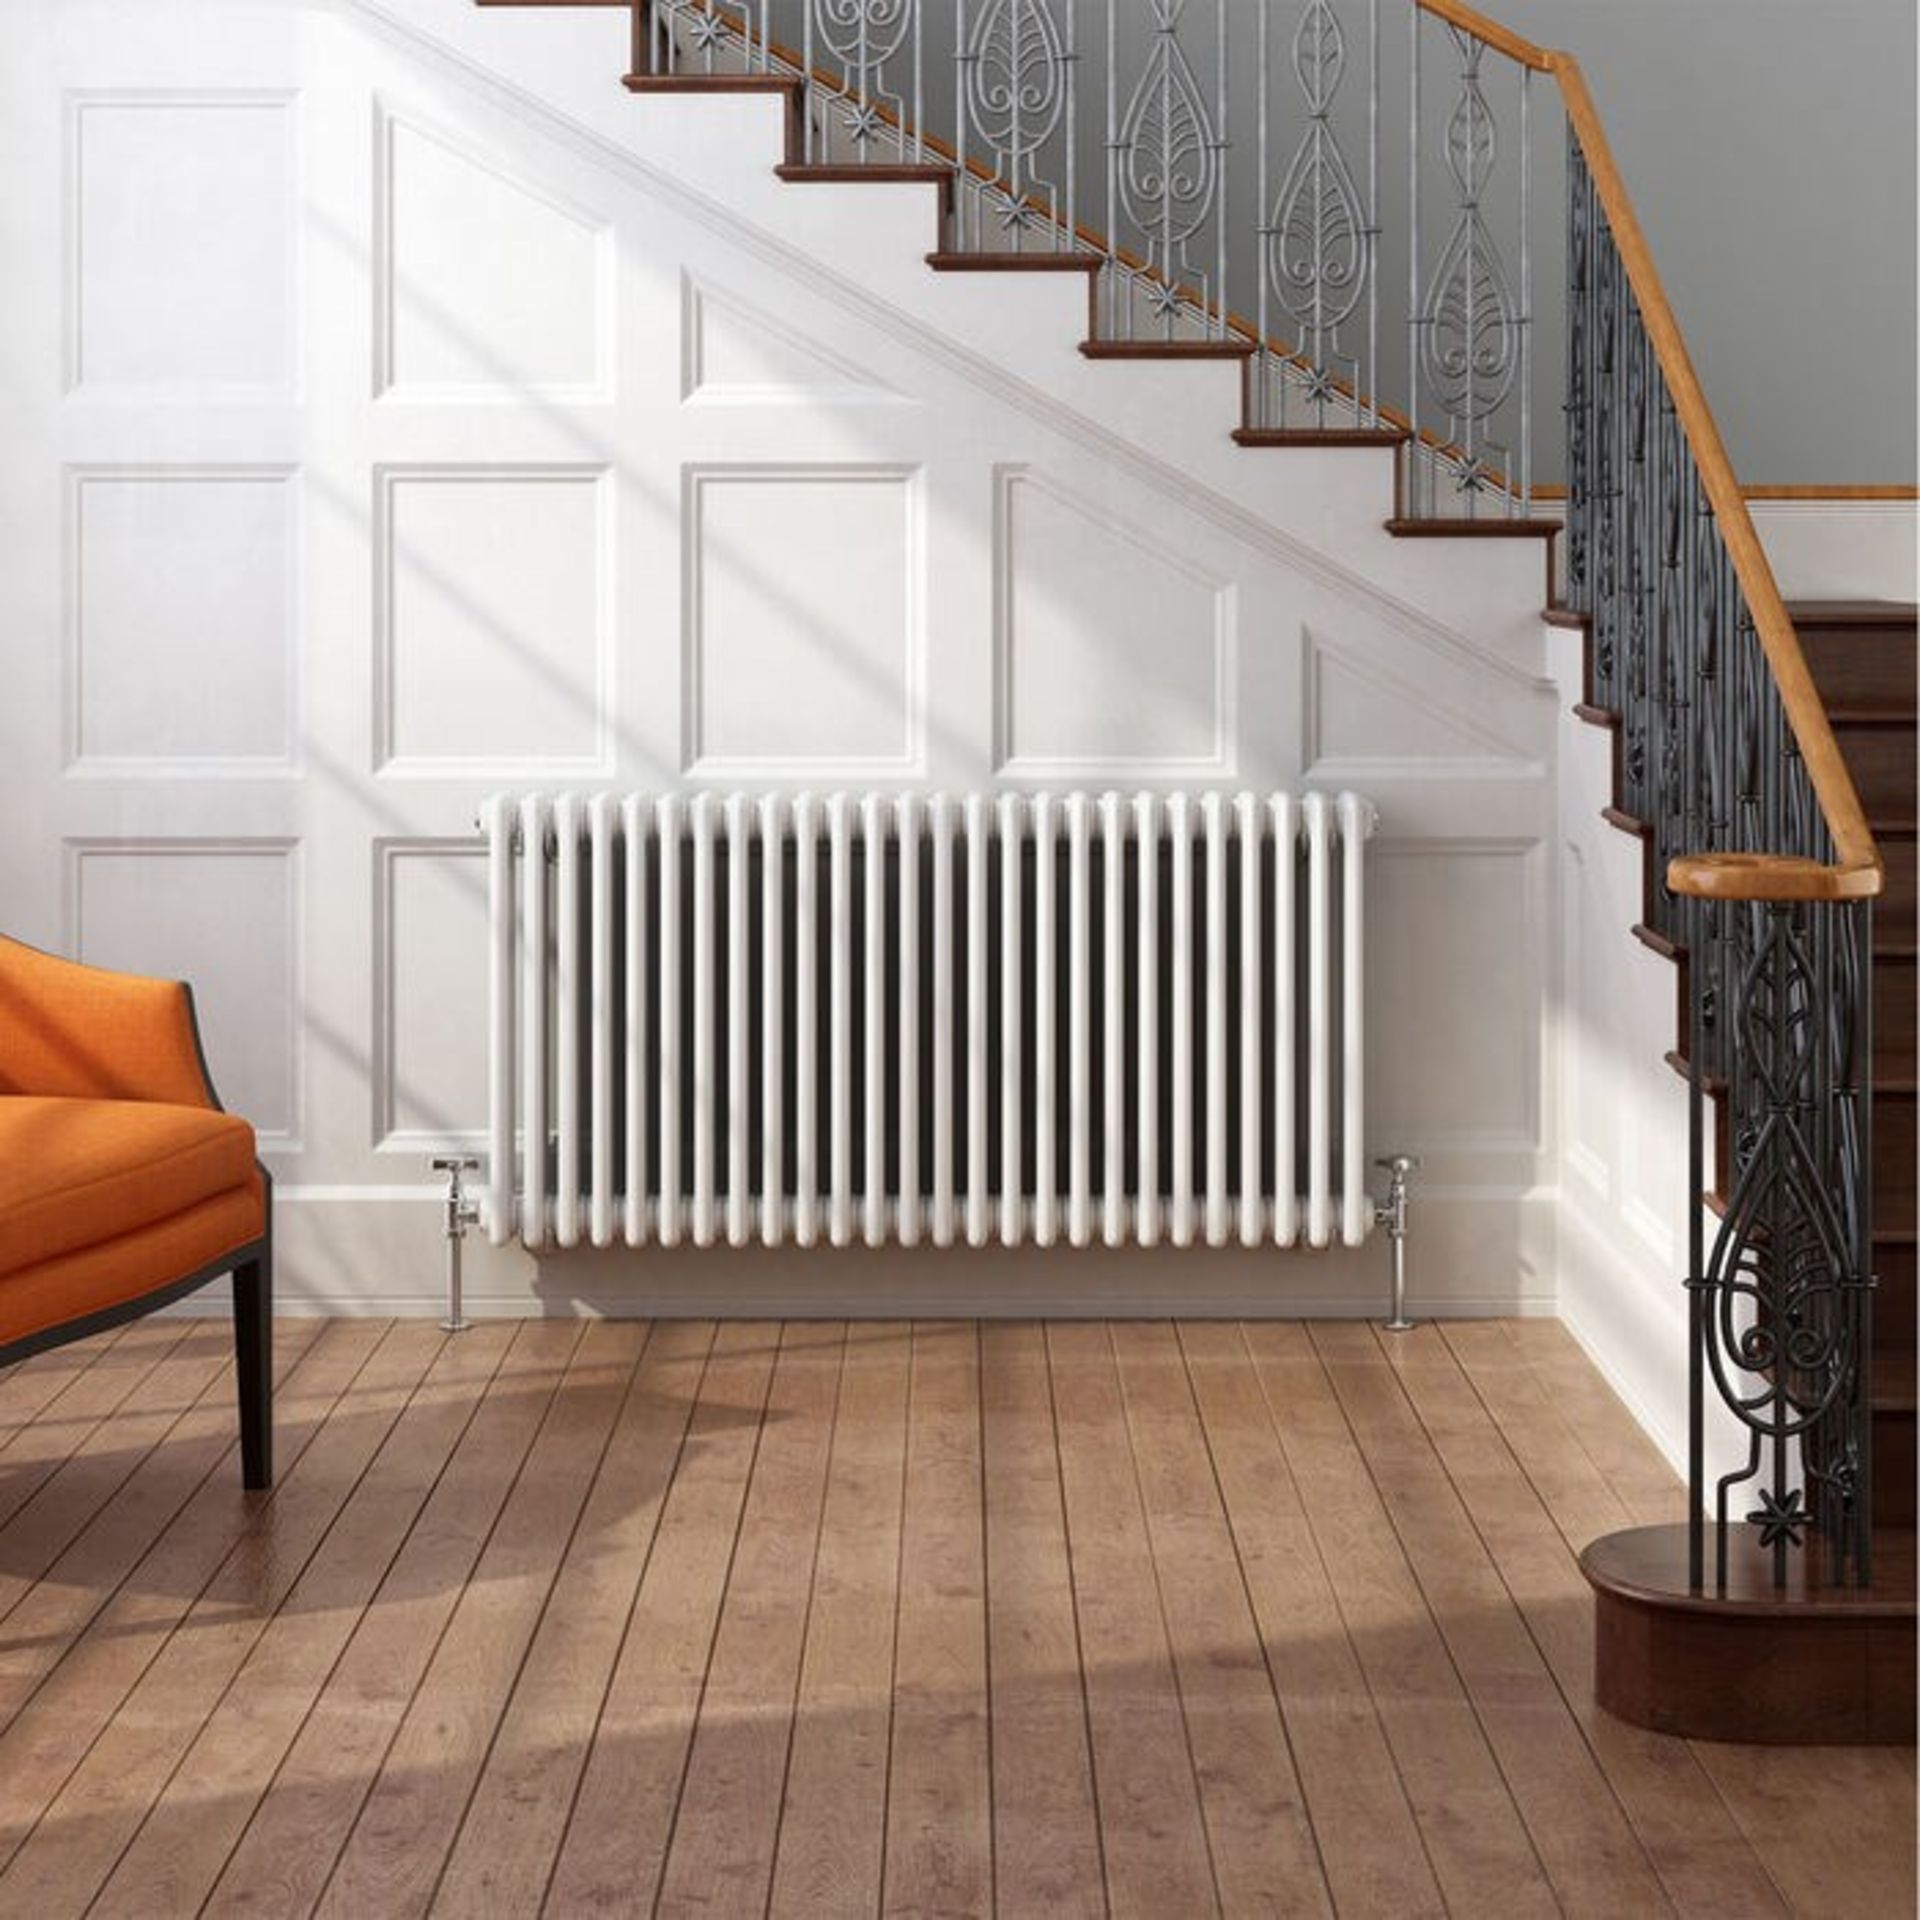 (RR87) 600x1410mm White Double Panel Horizontal Colosseum Traditional Radiator. RRP £589.99.Fo... (